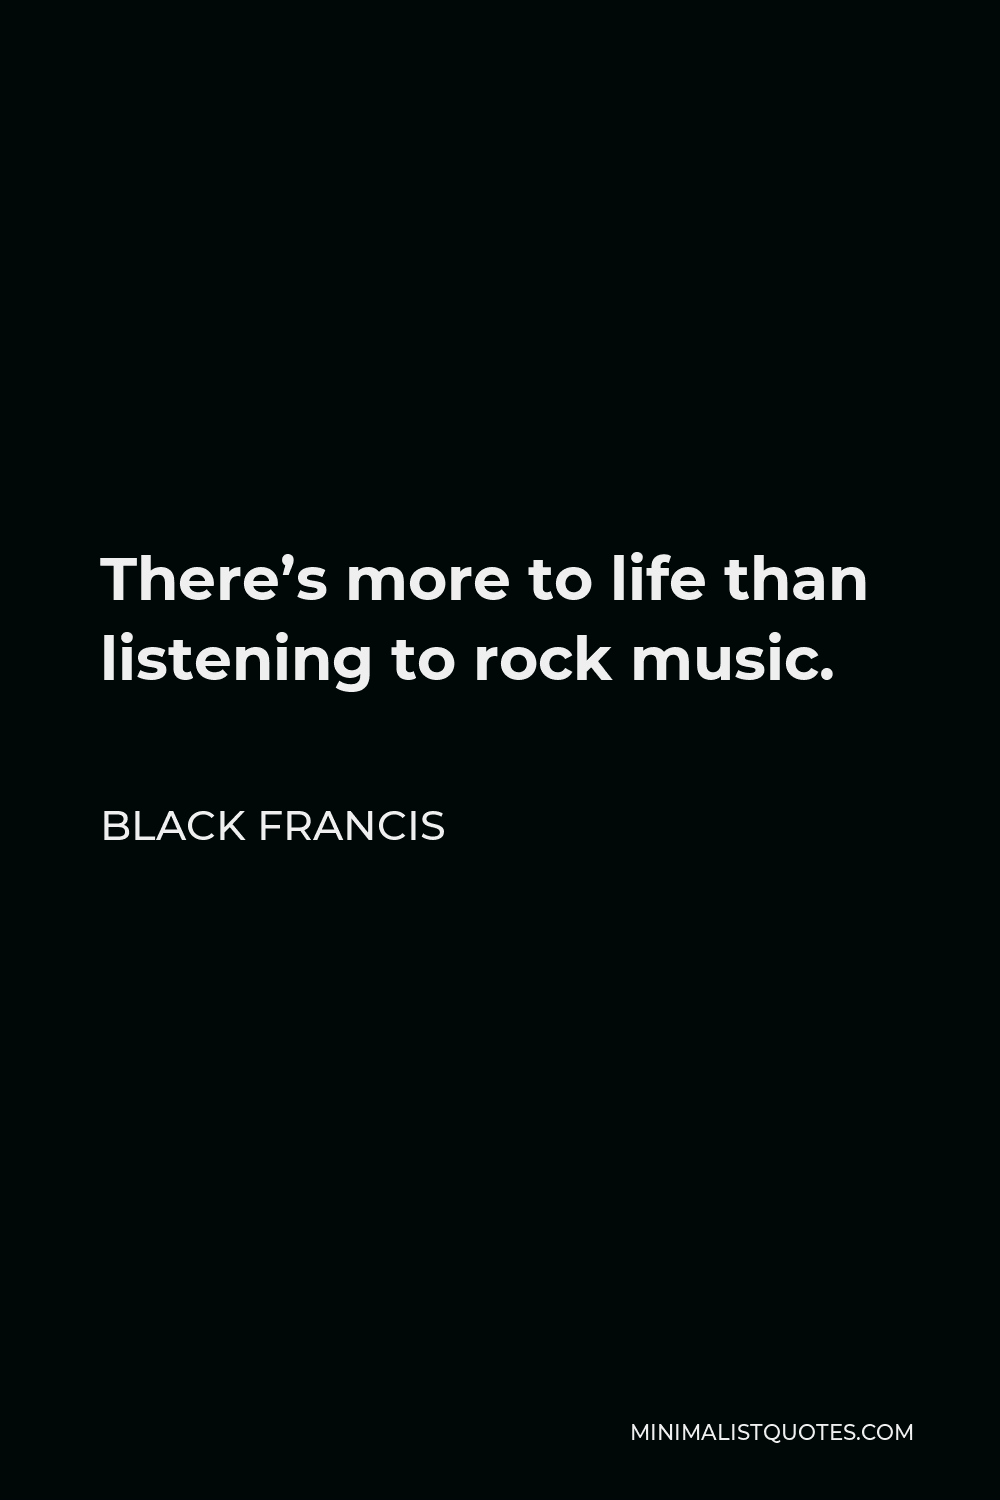 Black Francis Quote - There’s more to life than listening to rock music.